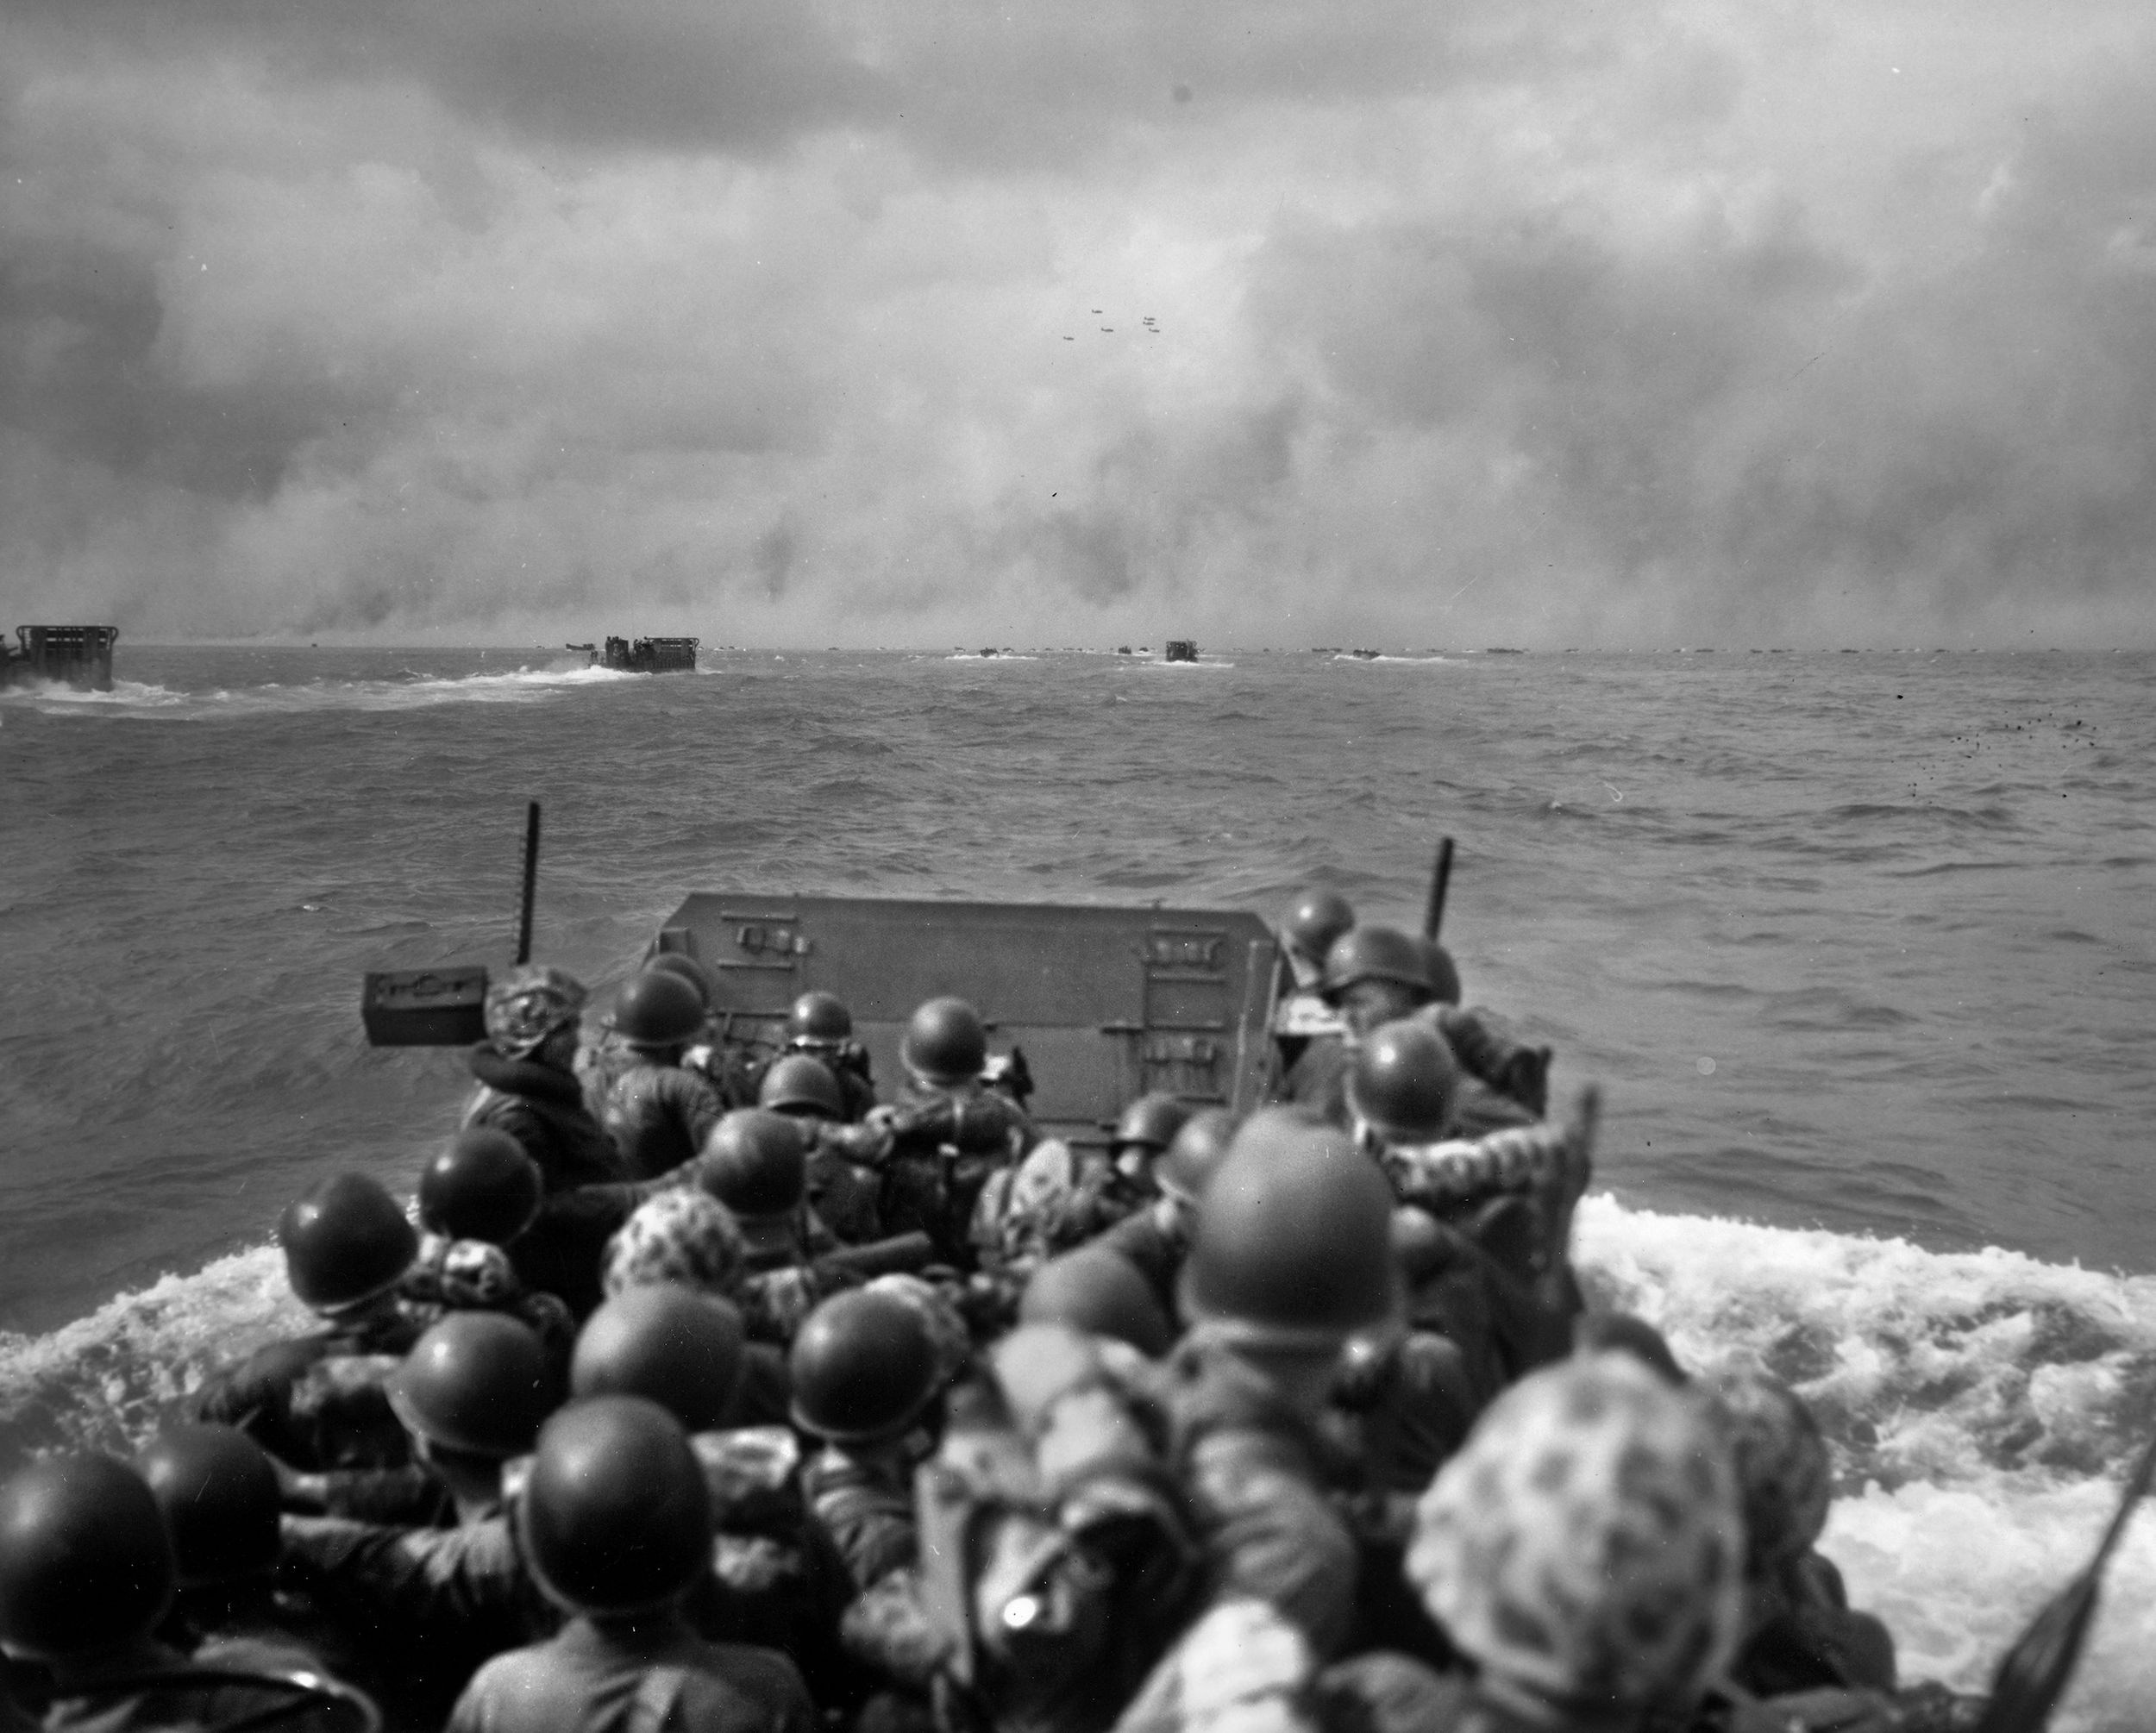 Smoke from the naval bombardment shrouds the Betio shoreline as LCVPs (Landing Craft, Vehicle and Personnel—also known as “Higgins” boats) packed with Marines, head for the invasion beaches. Many Marines were cut down before they even reached the beaches.